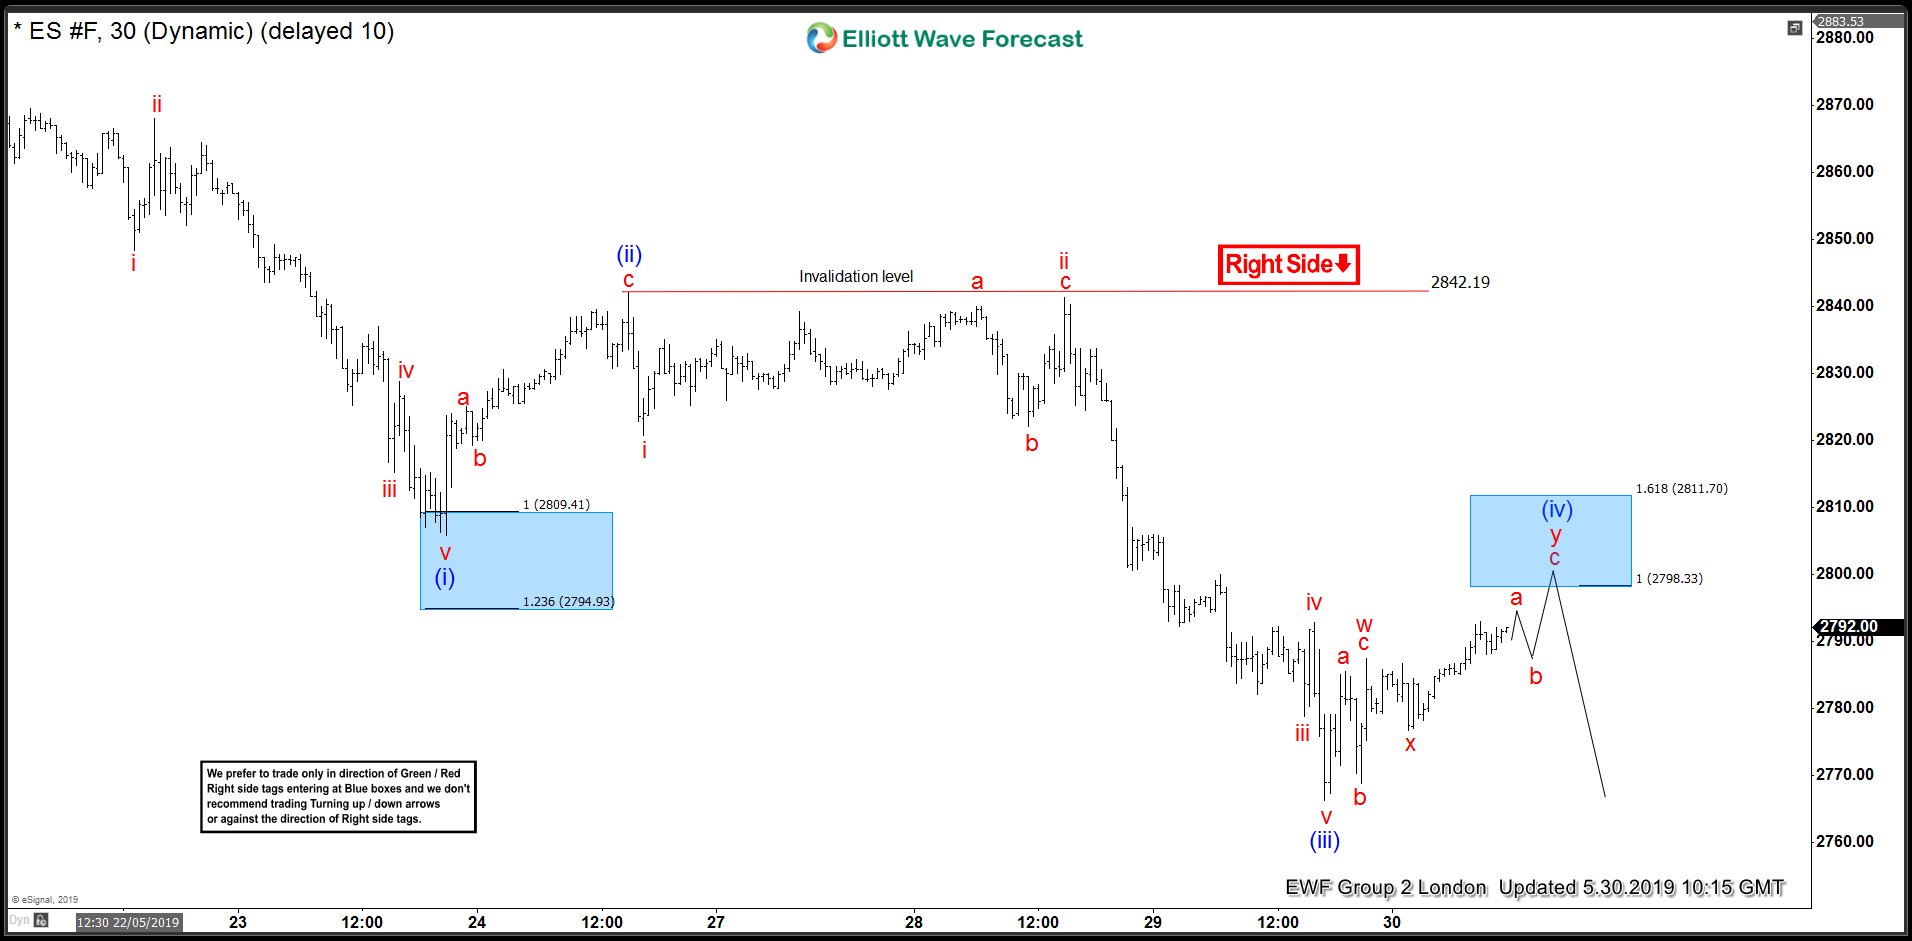 ES_F 30 May 1 Hour Elliott Wave Chart before New Tariffs on Mexico were announced